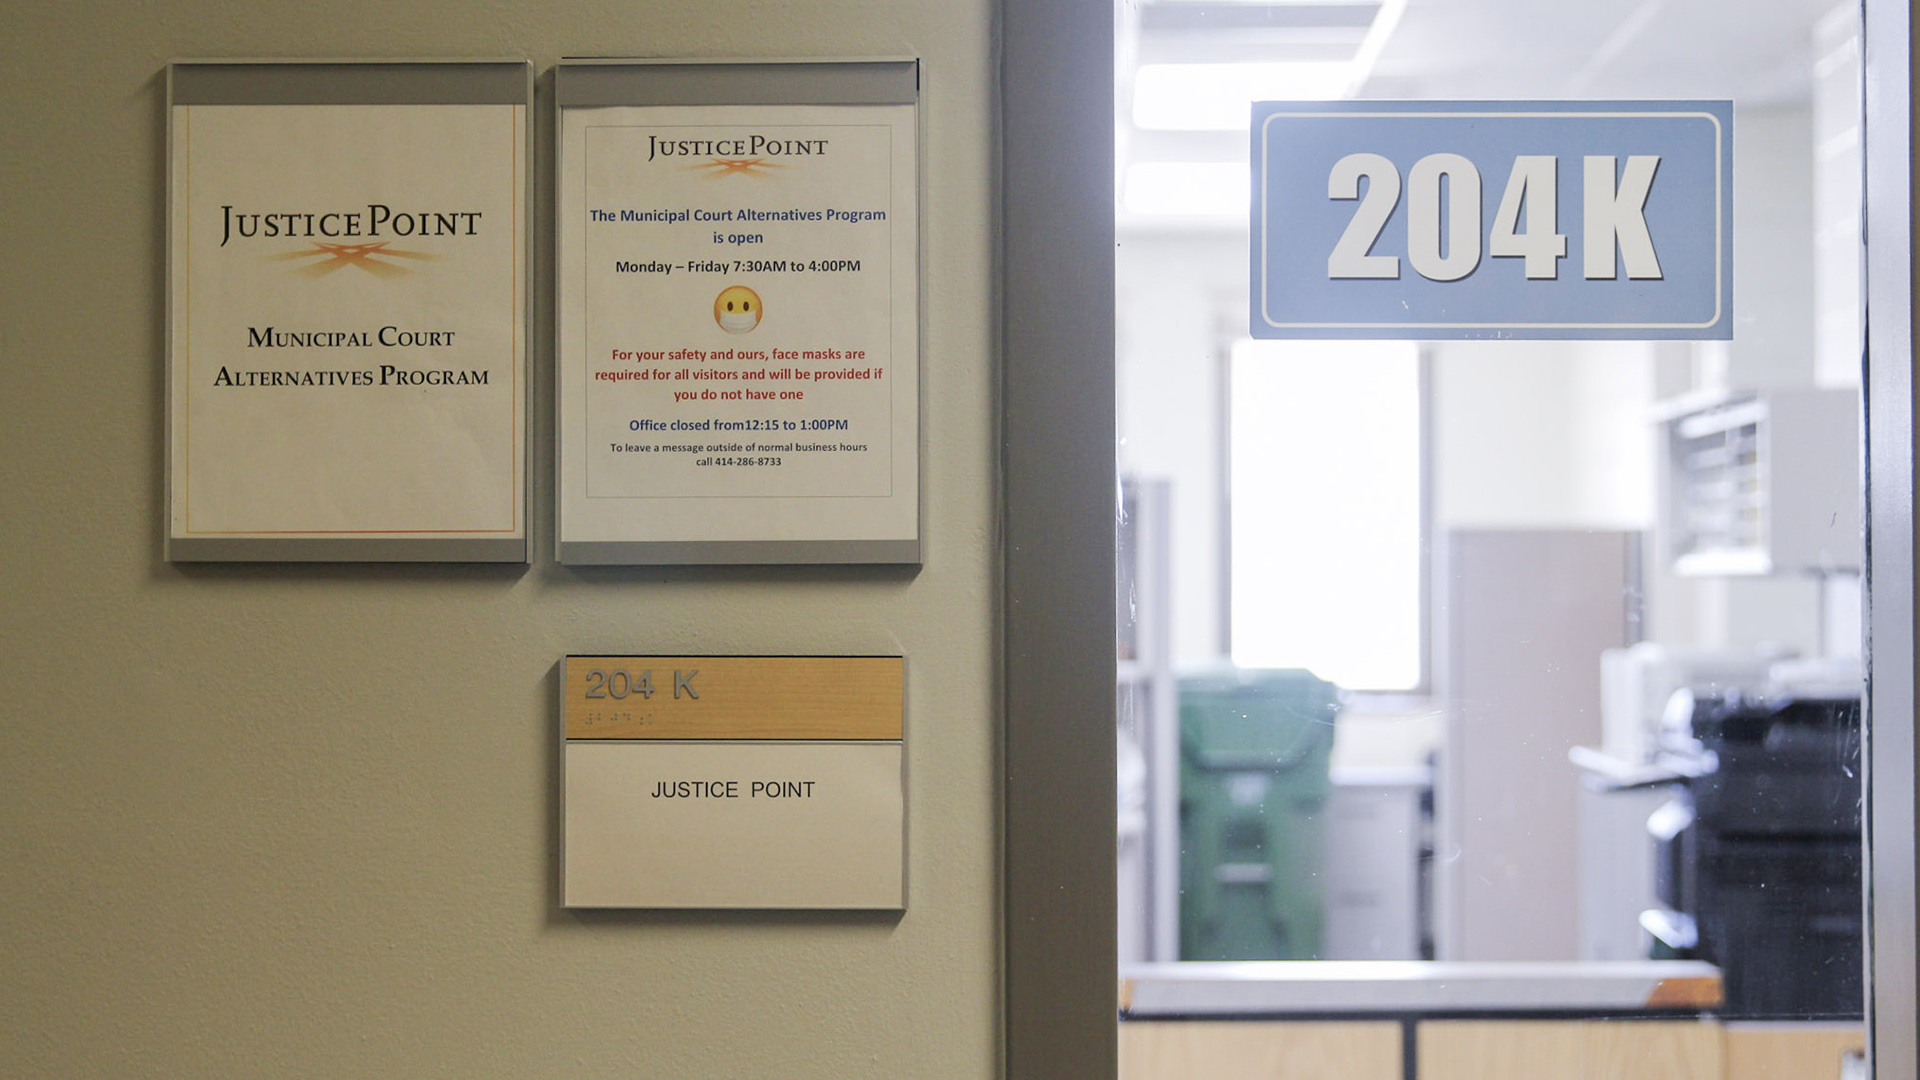 An office with a photocopy machine, shelves and other furniture is visible through a glass door window with a label reading "204K"and other signs reading "JusticePoint Municipal Court Alternatives Program" and showing its hours.